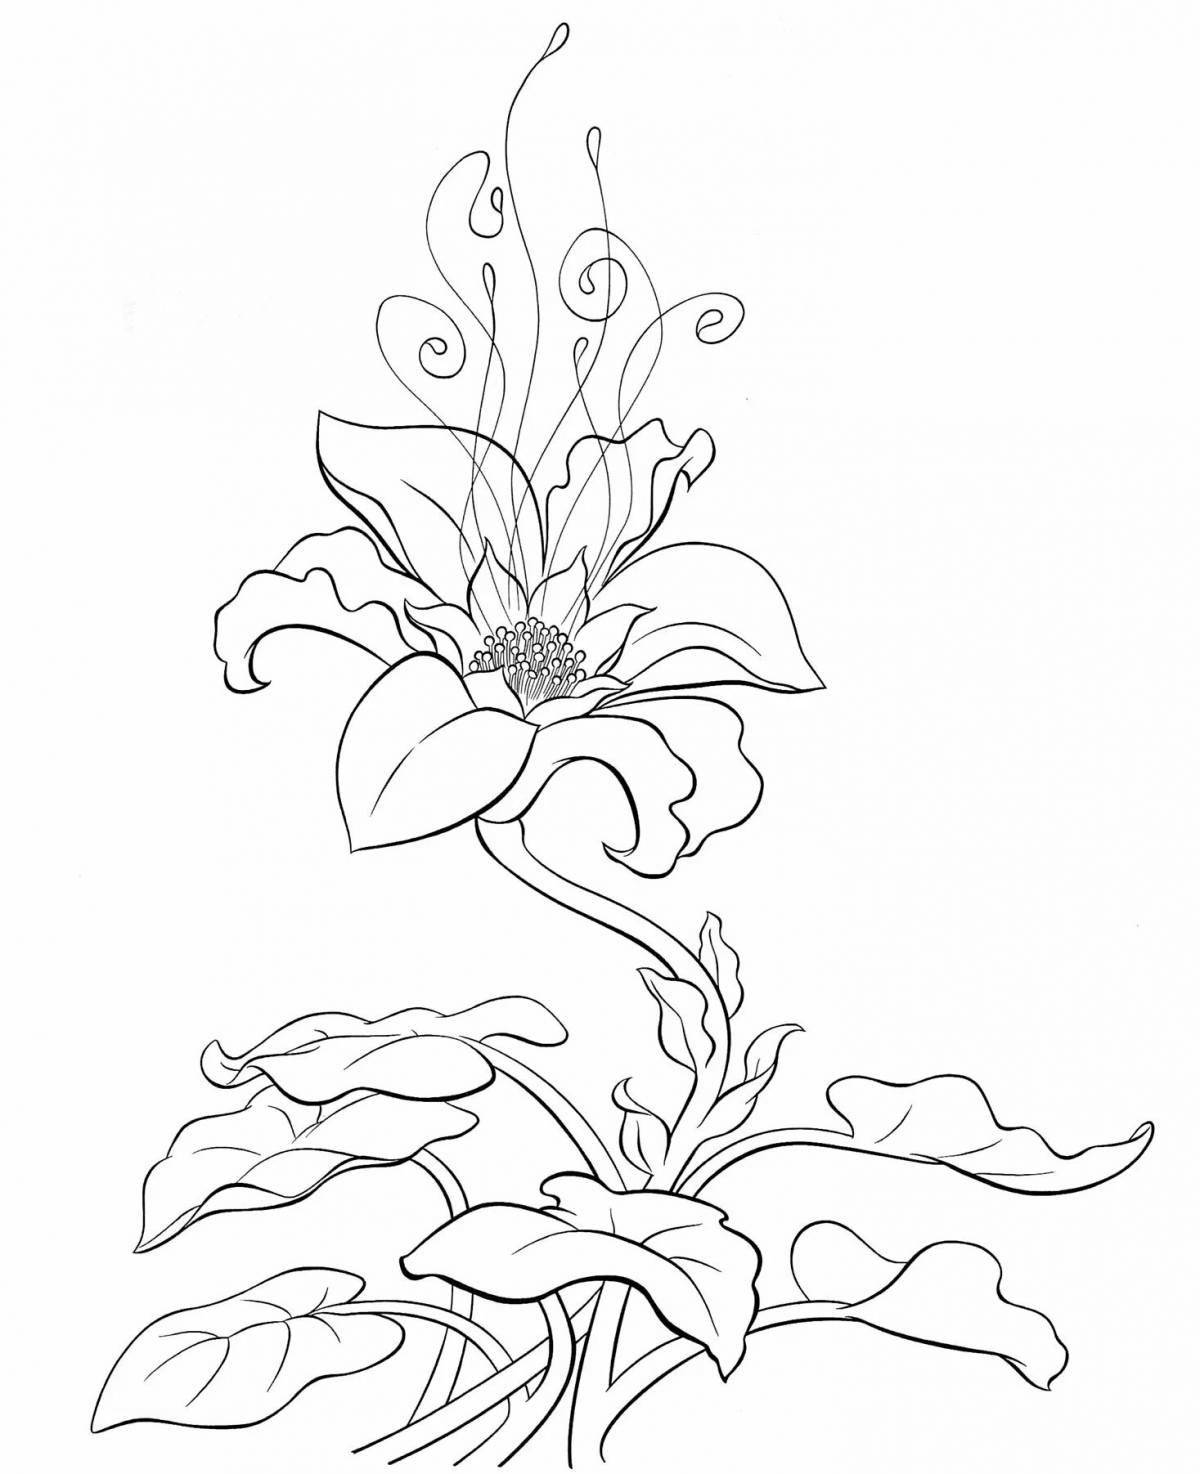 Coloring book poetic stone flower